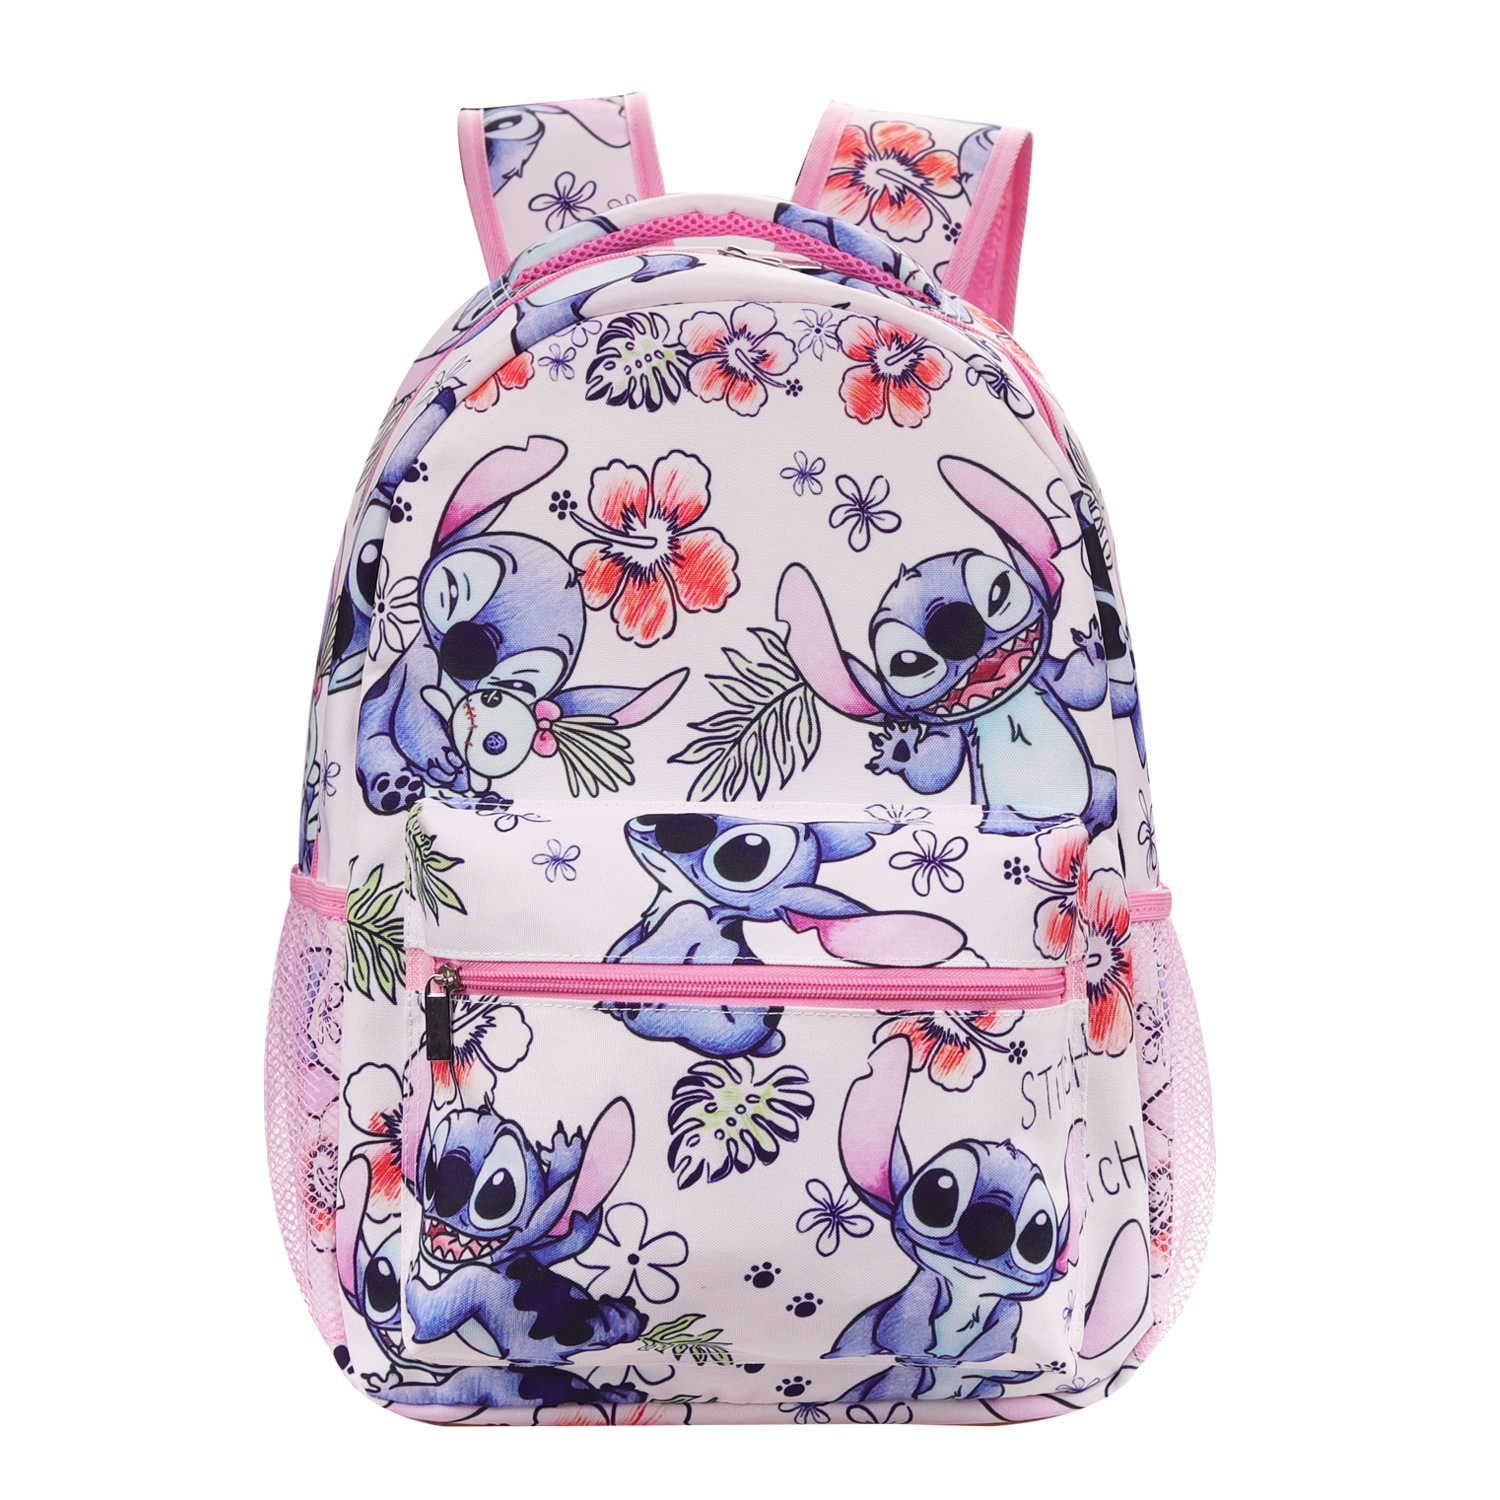 Stitch Backpack for Kids Girl's Stitch School Backpack Ideal Present